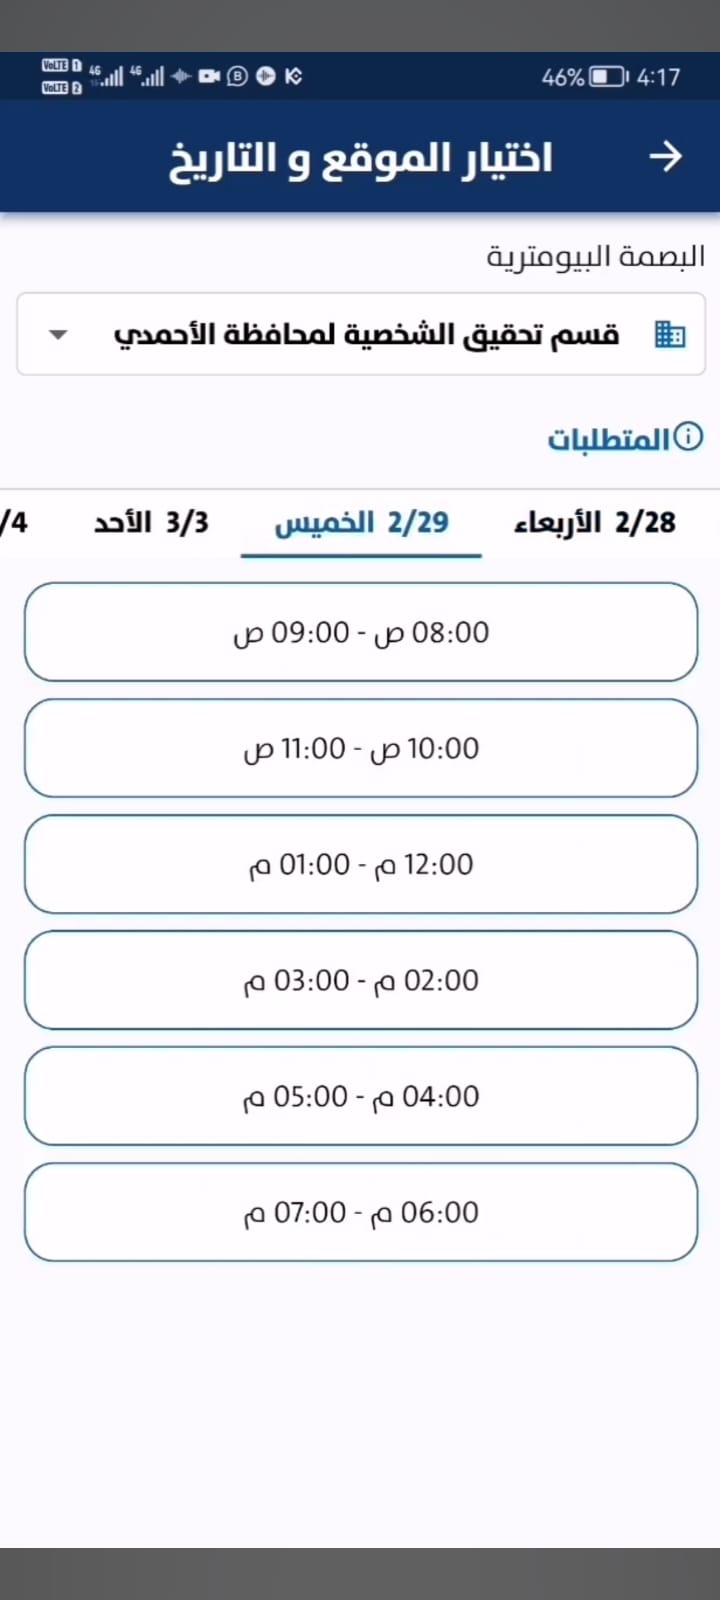 kuwait biometric appointment: Easy Scheduling Through Meta, Sahel, and MOI